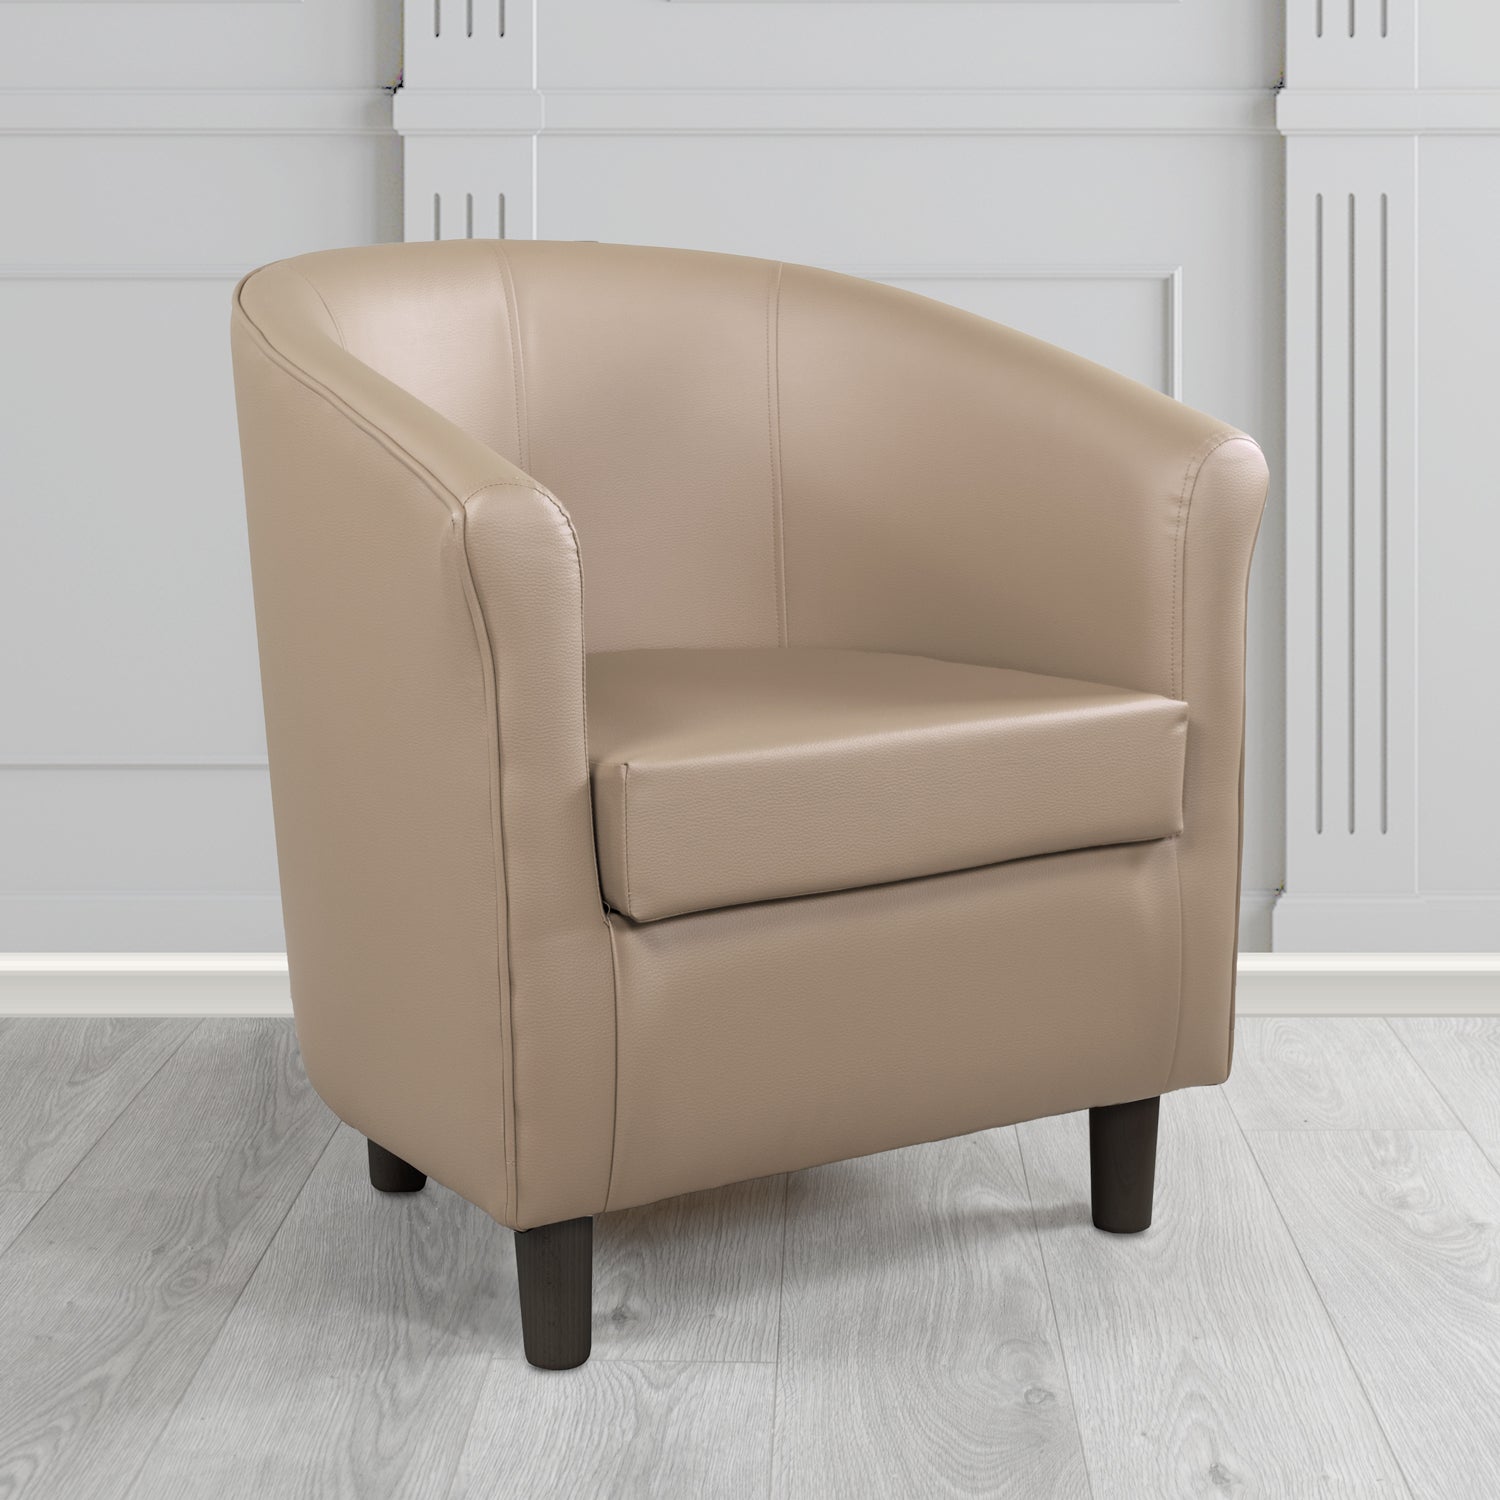 Tuscany Just Colour Magnum Antimicrobial Crib 5 Contract Faux Leather Tub Chair - The Tub Chair Shop